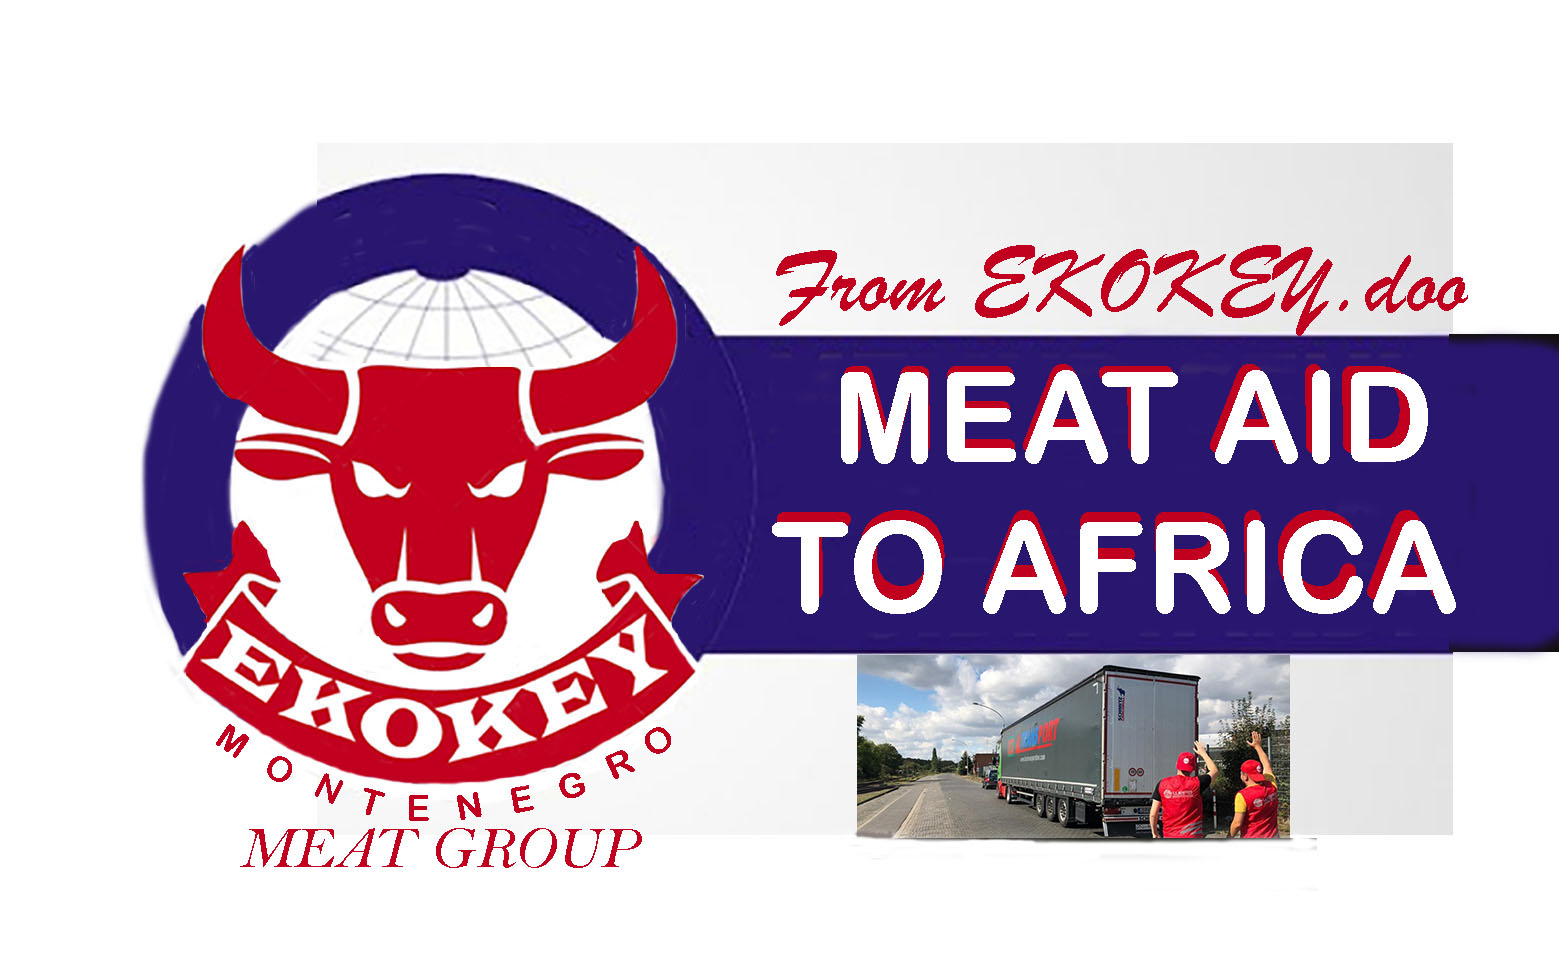 AFRICA MEAT AID